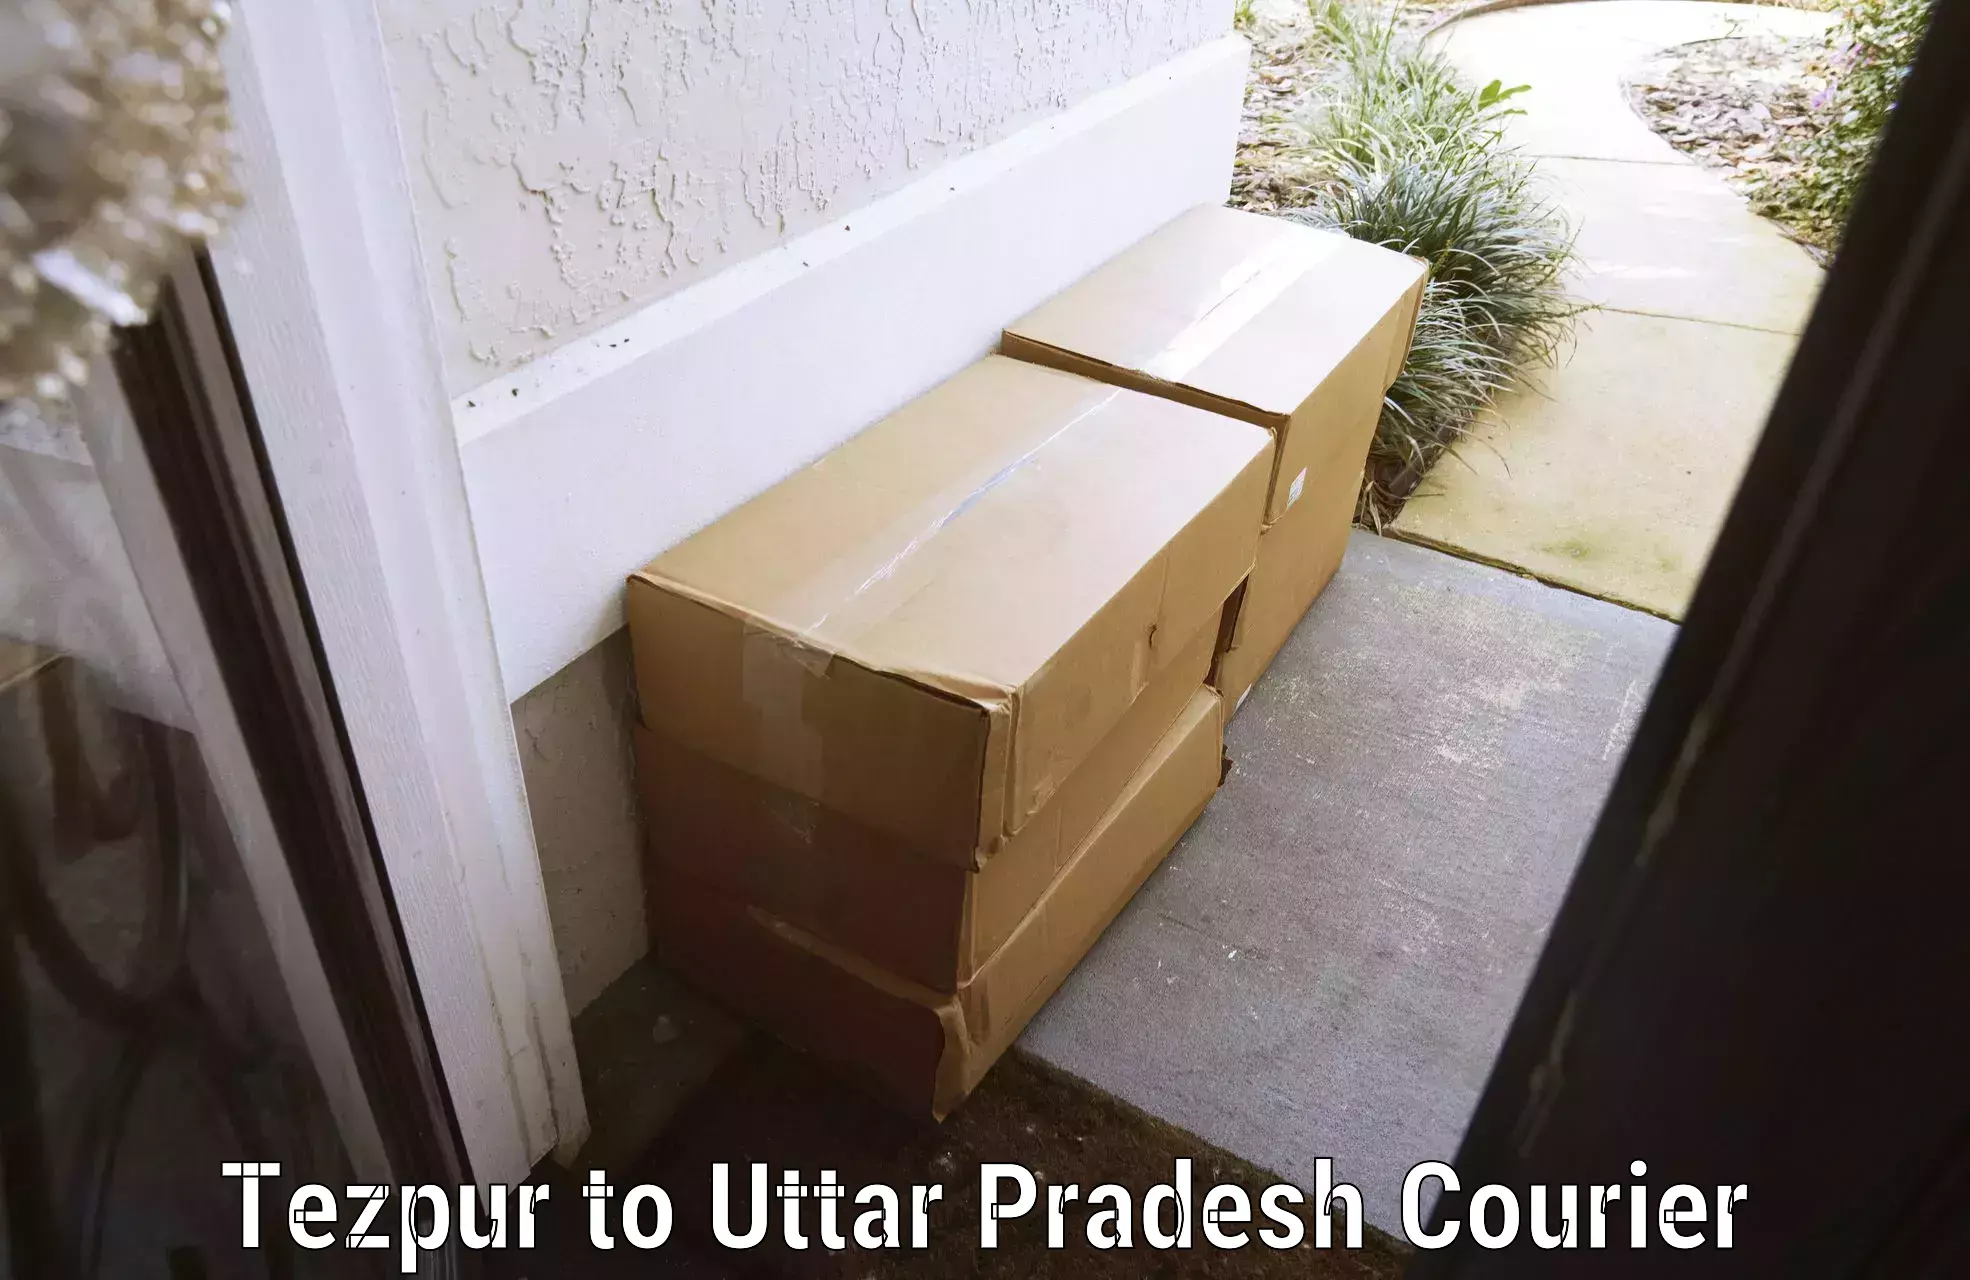 Instant baggage transport quote Tezpur to Ayodhya